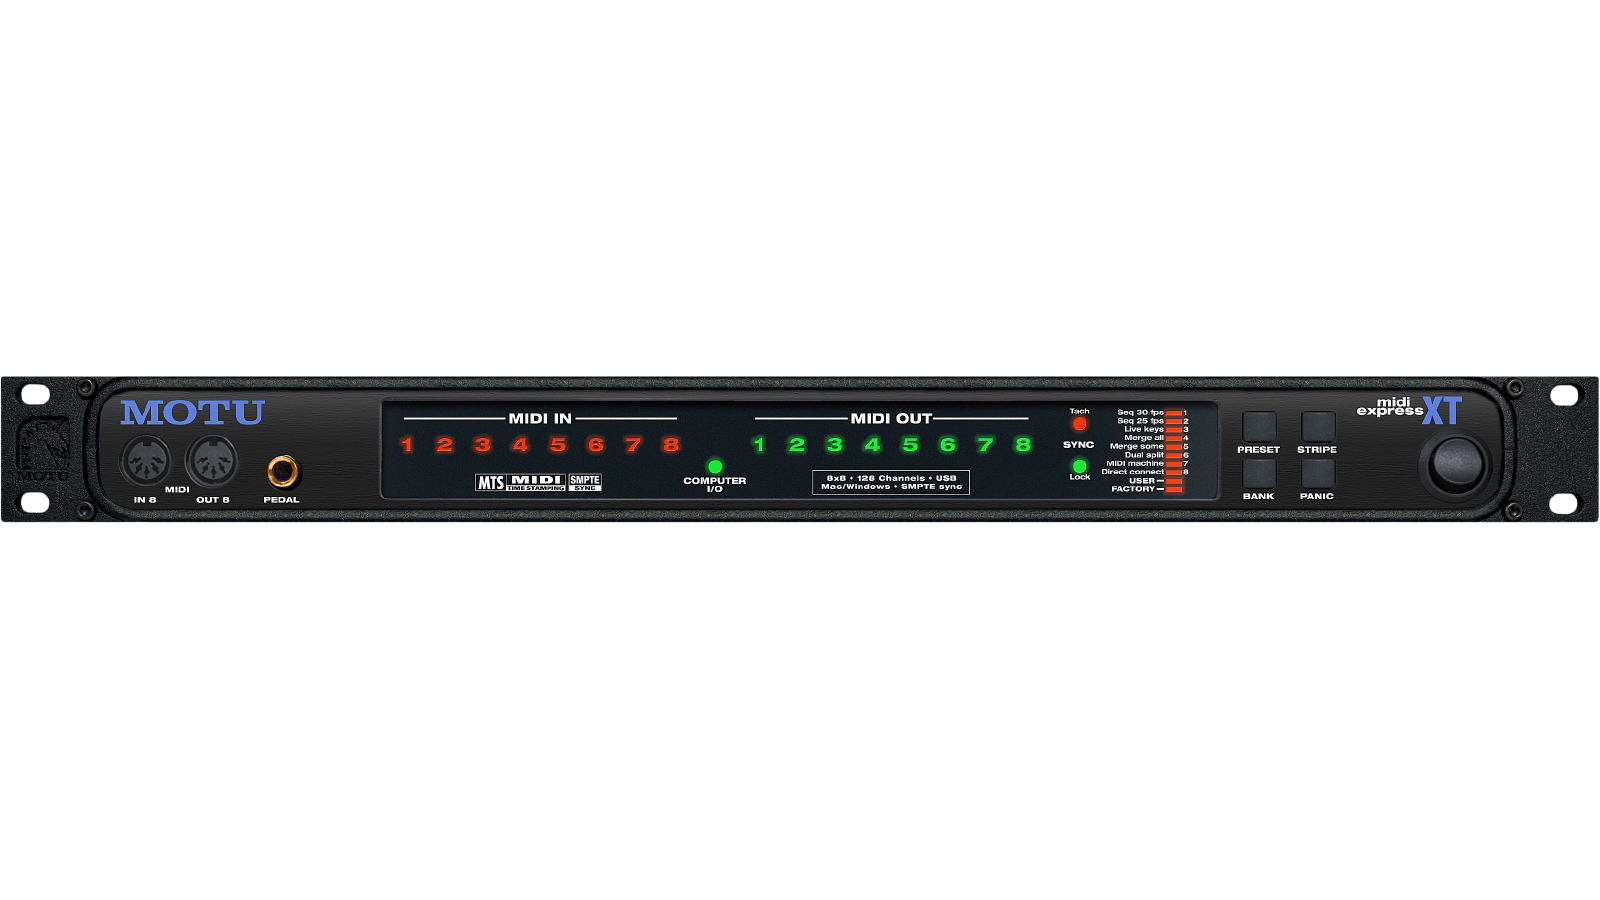 8-in/8-out MIDI interface, patchbay, and merger with time code sync